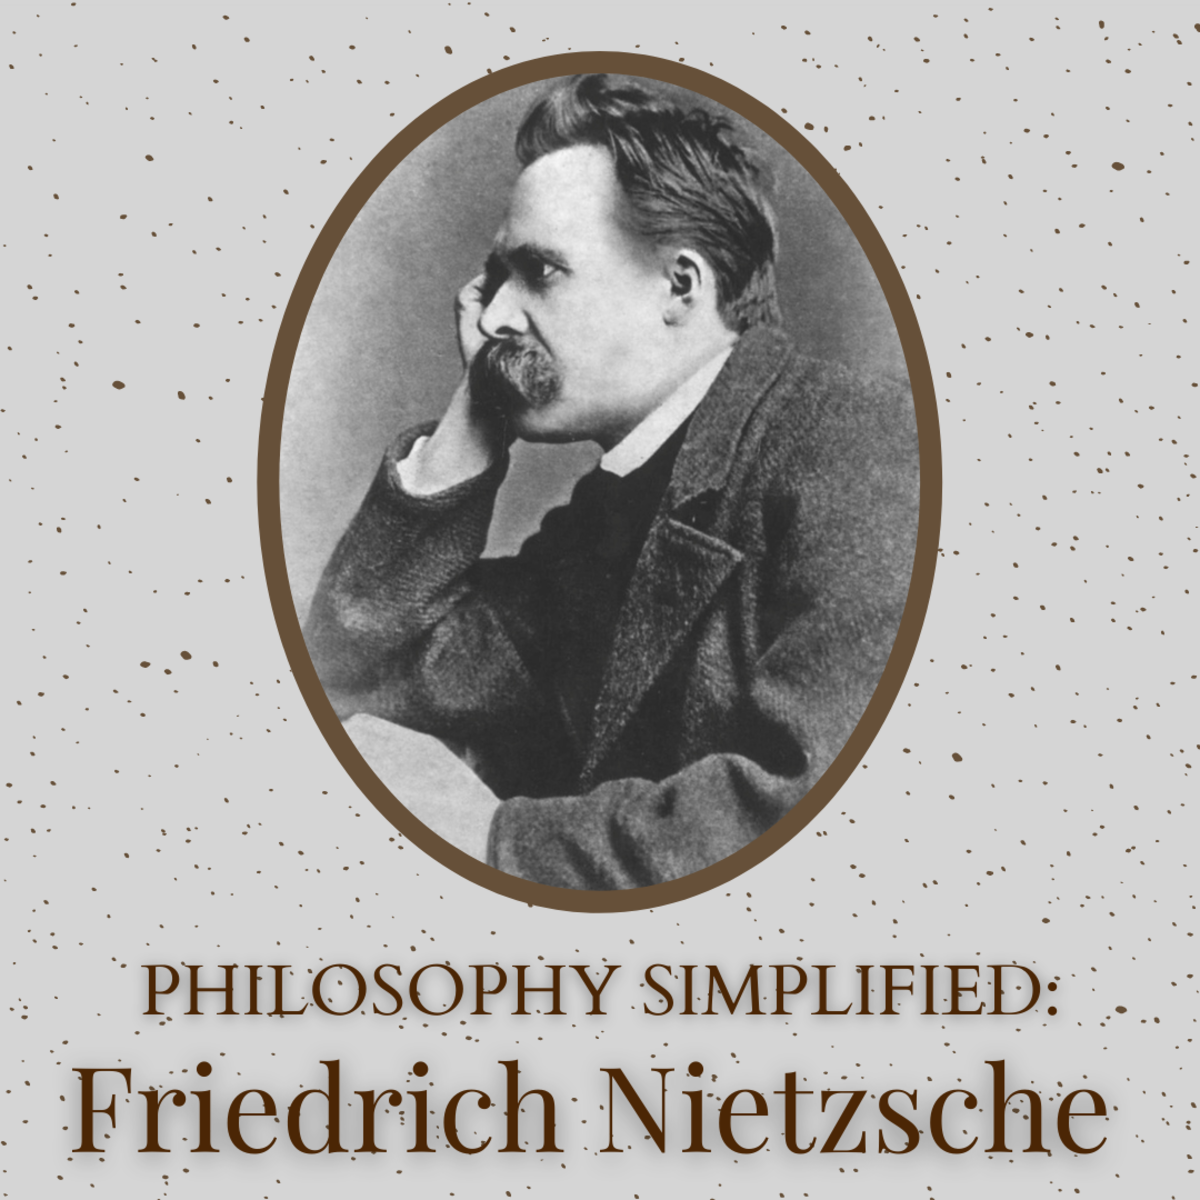 This article will take a closer look at Friedrich Nietzsche's life and provide interpretations of his philosophical works.